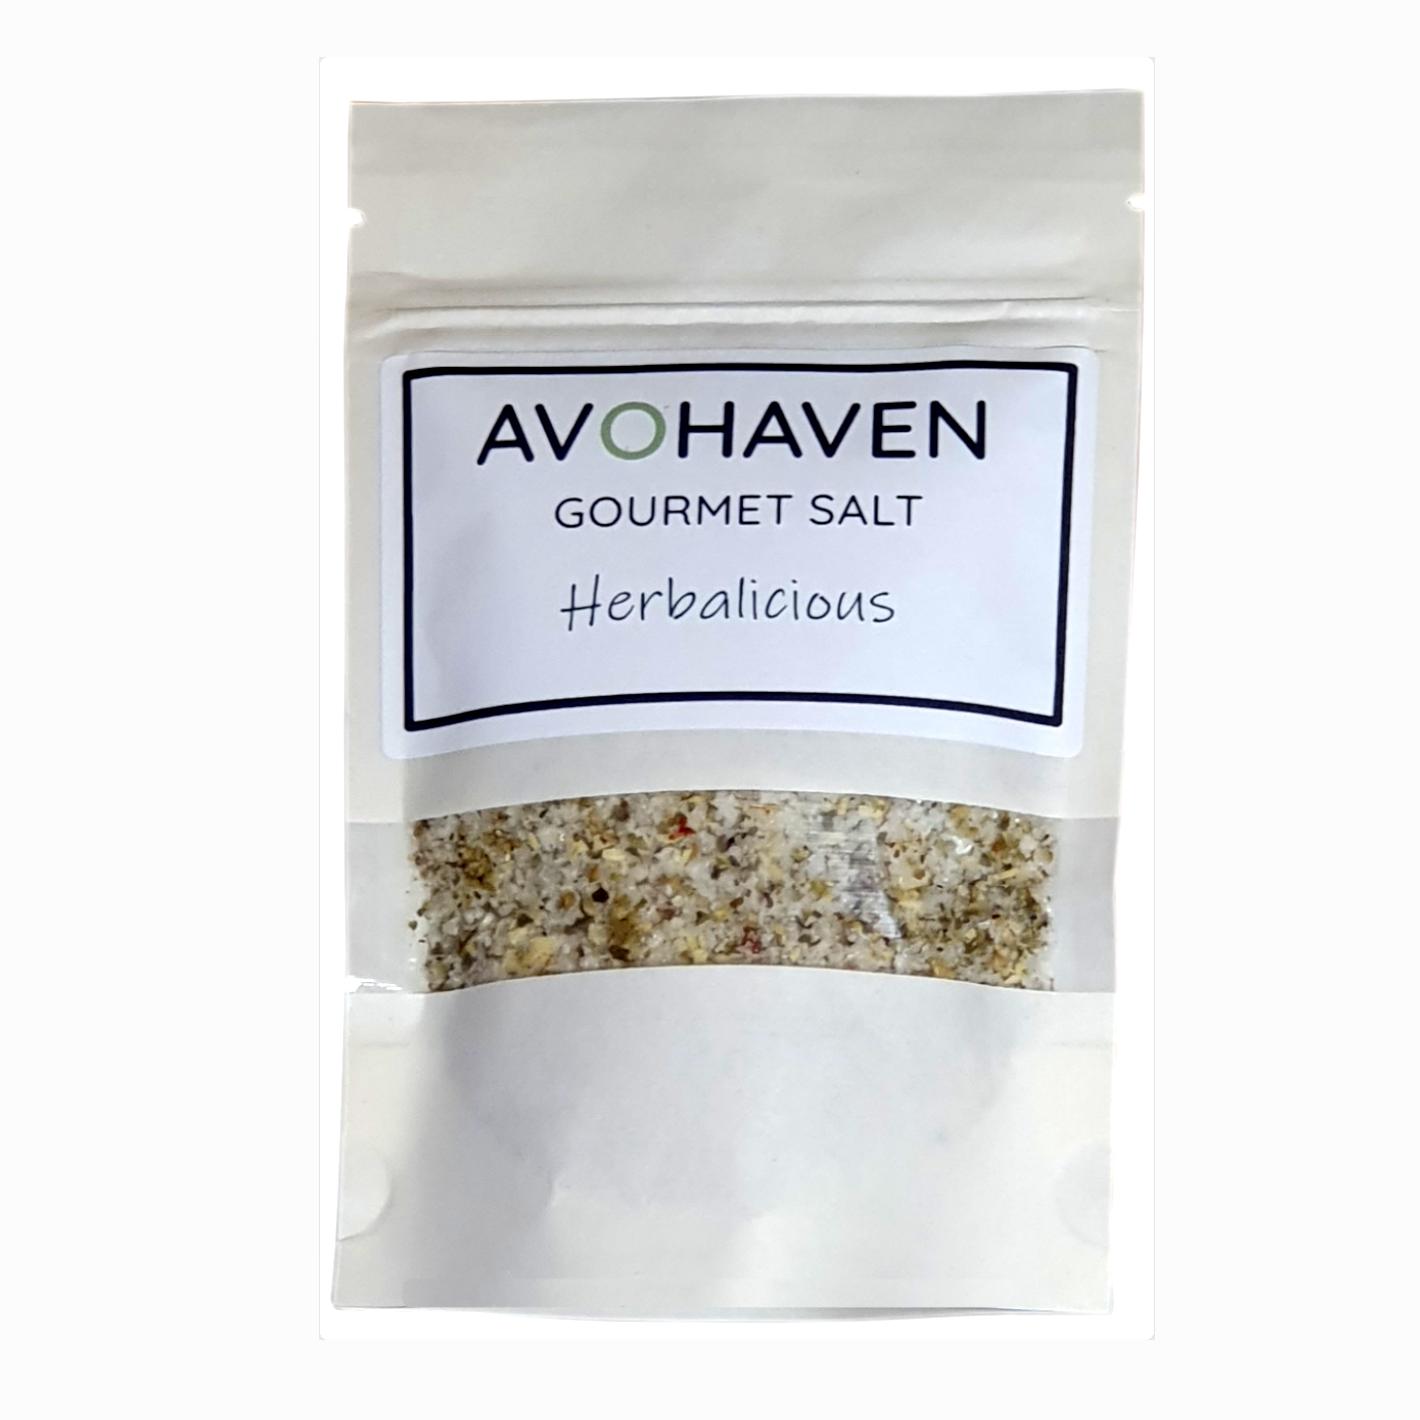 product image for Avohaven - Herbalicious - Gourmet Salt